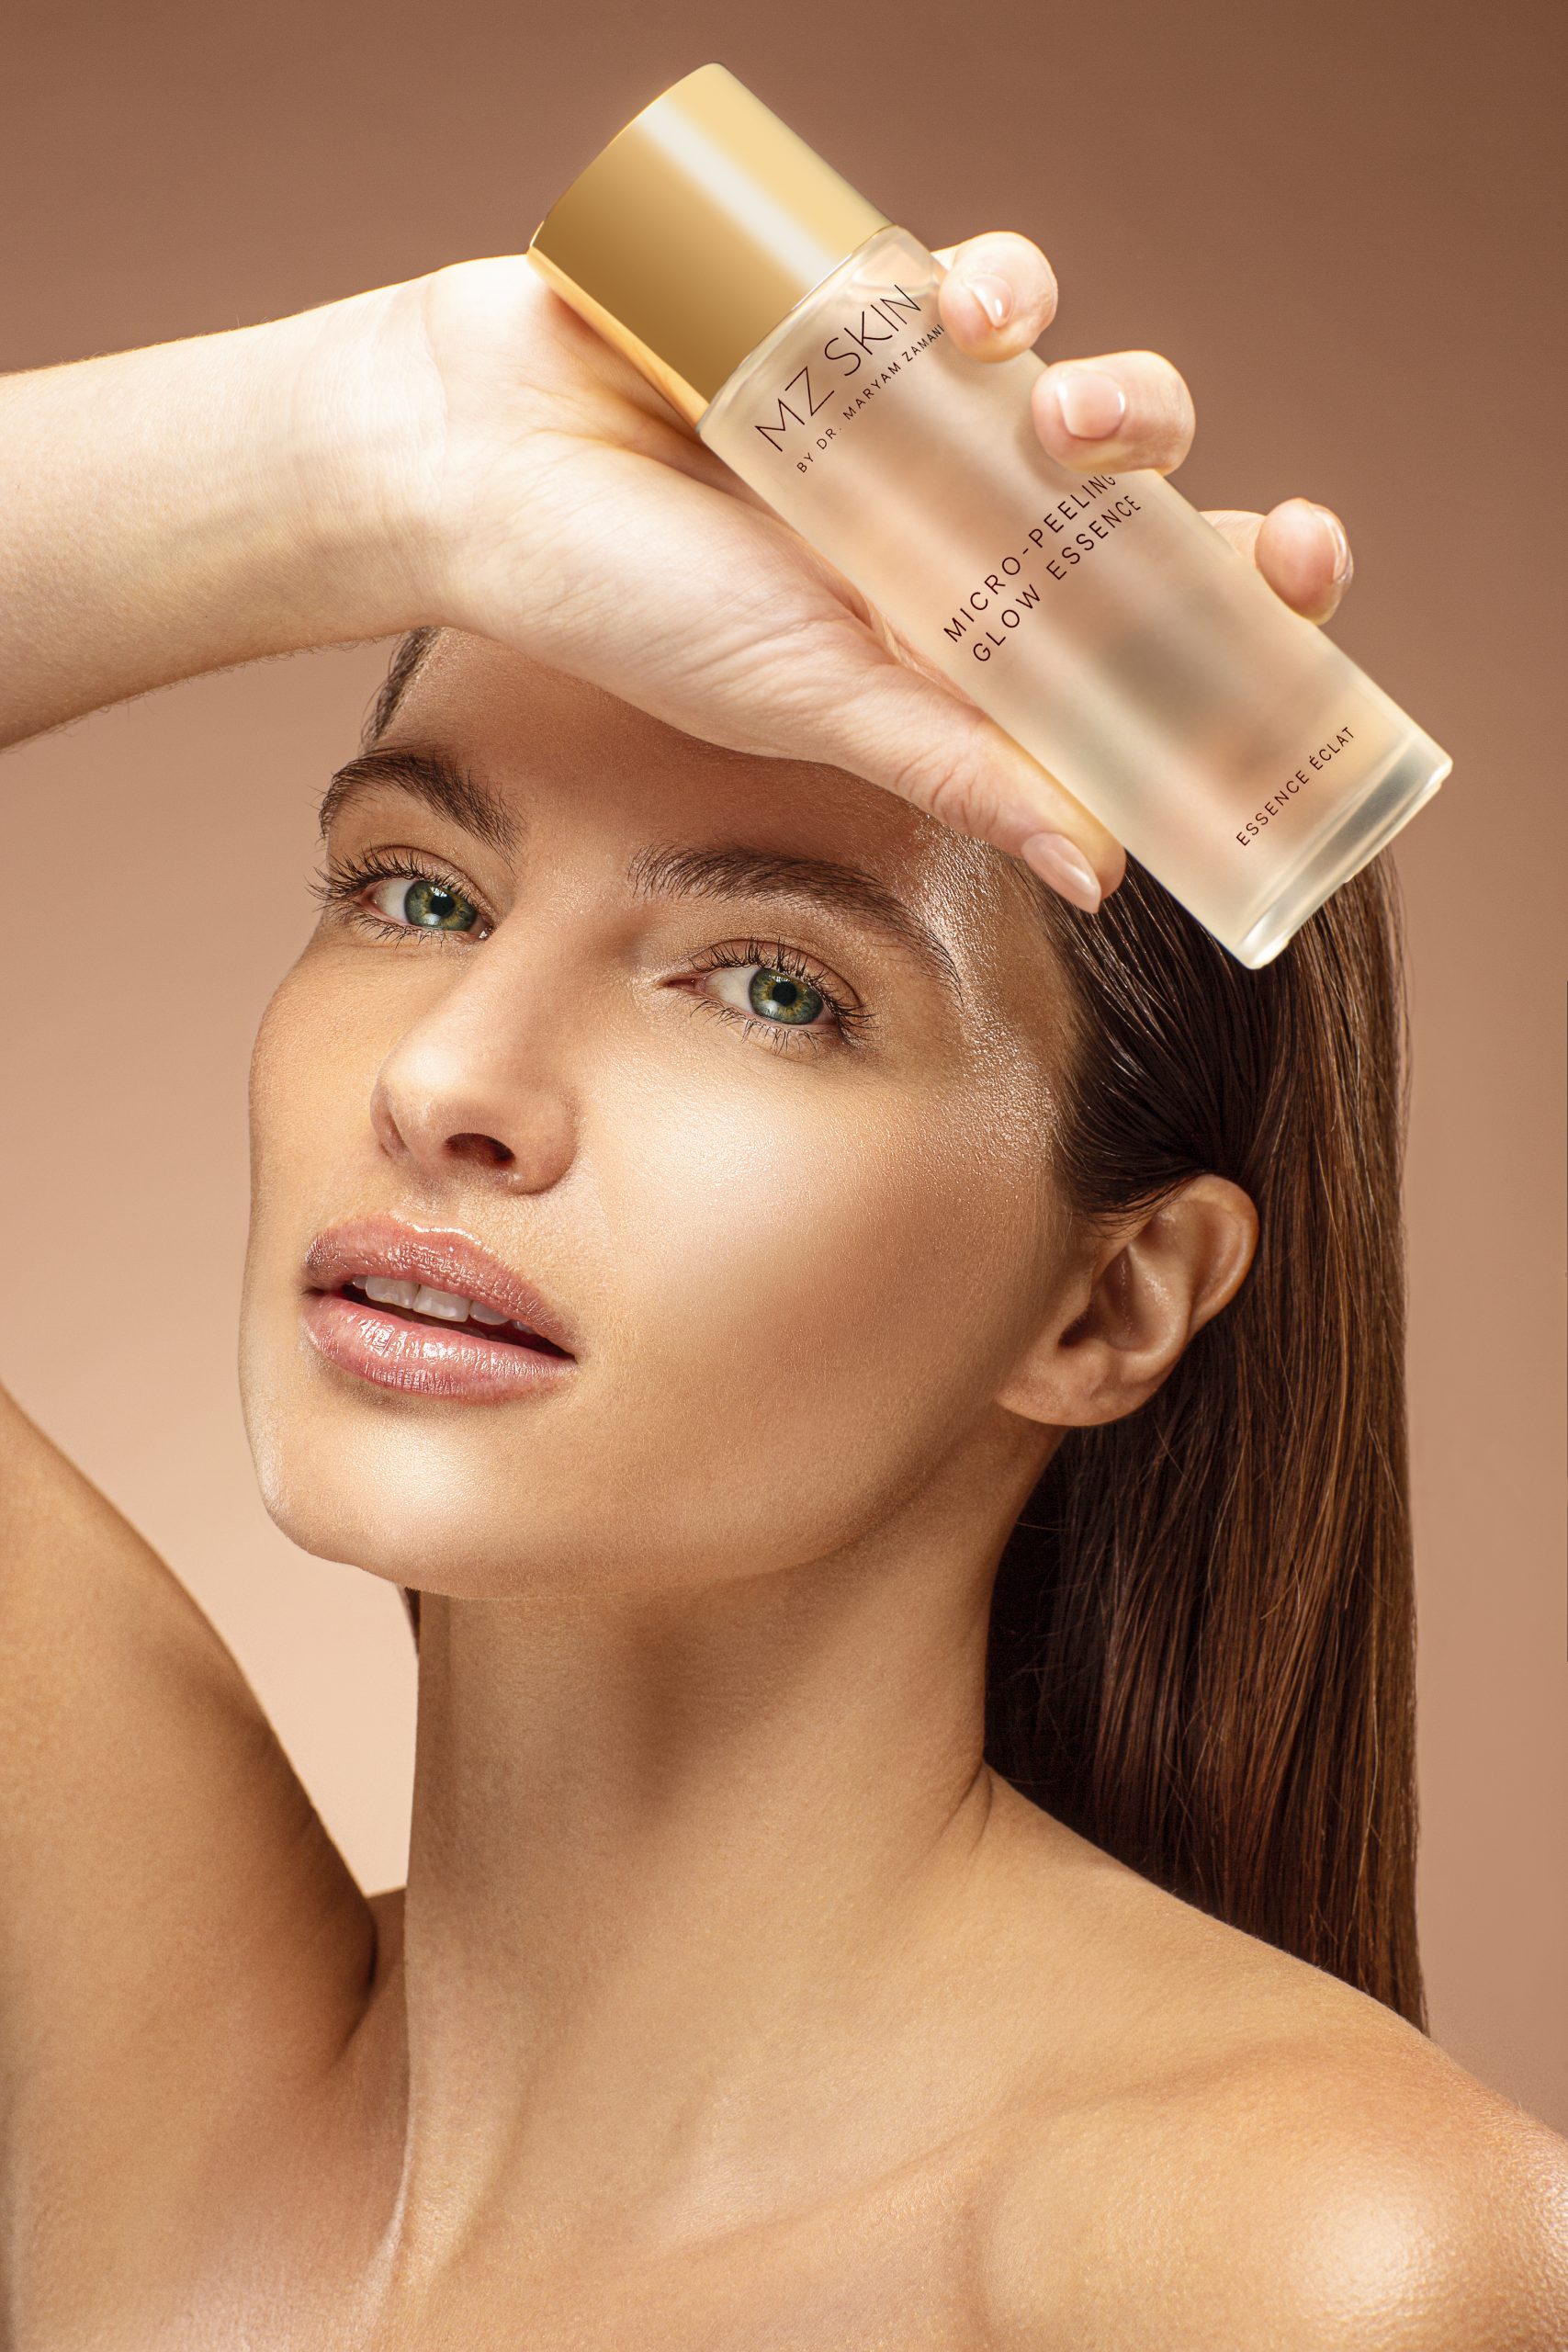 Why These New-Age Toners Are Beauty's New Darlings